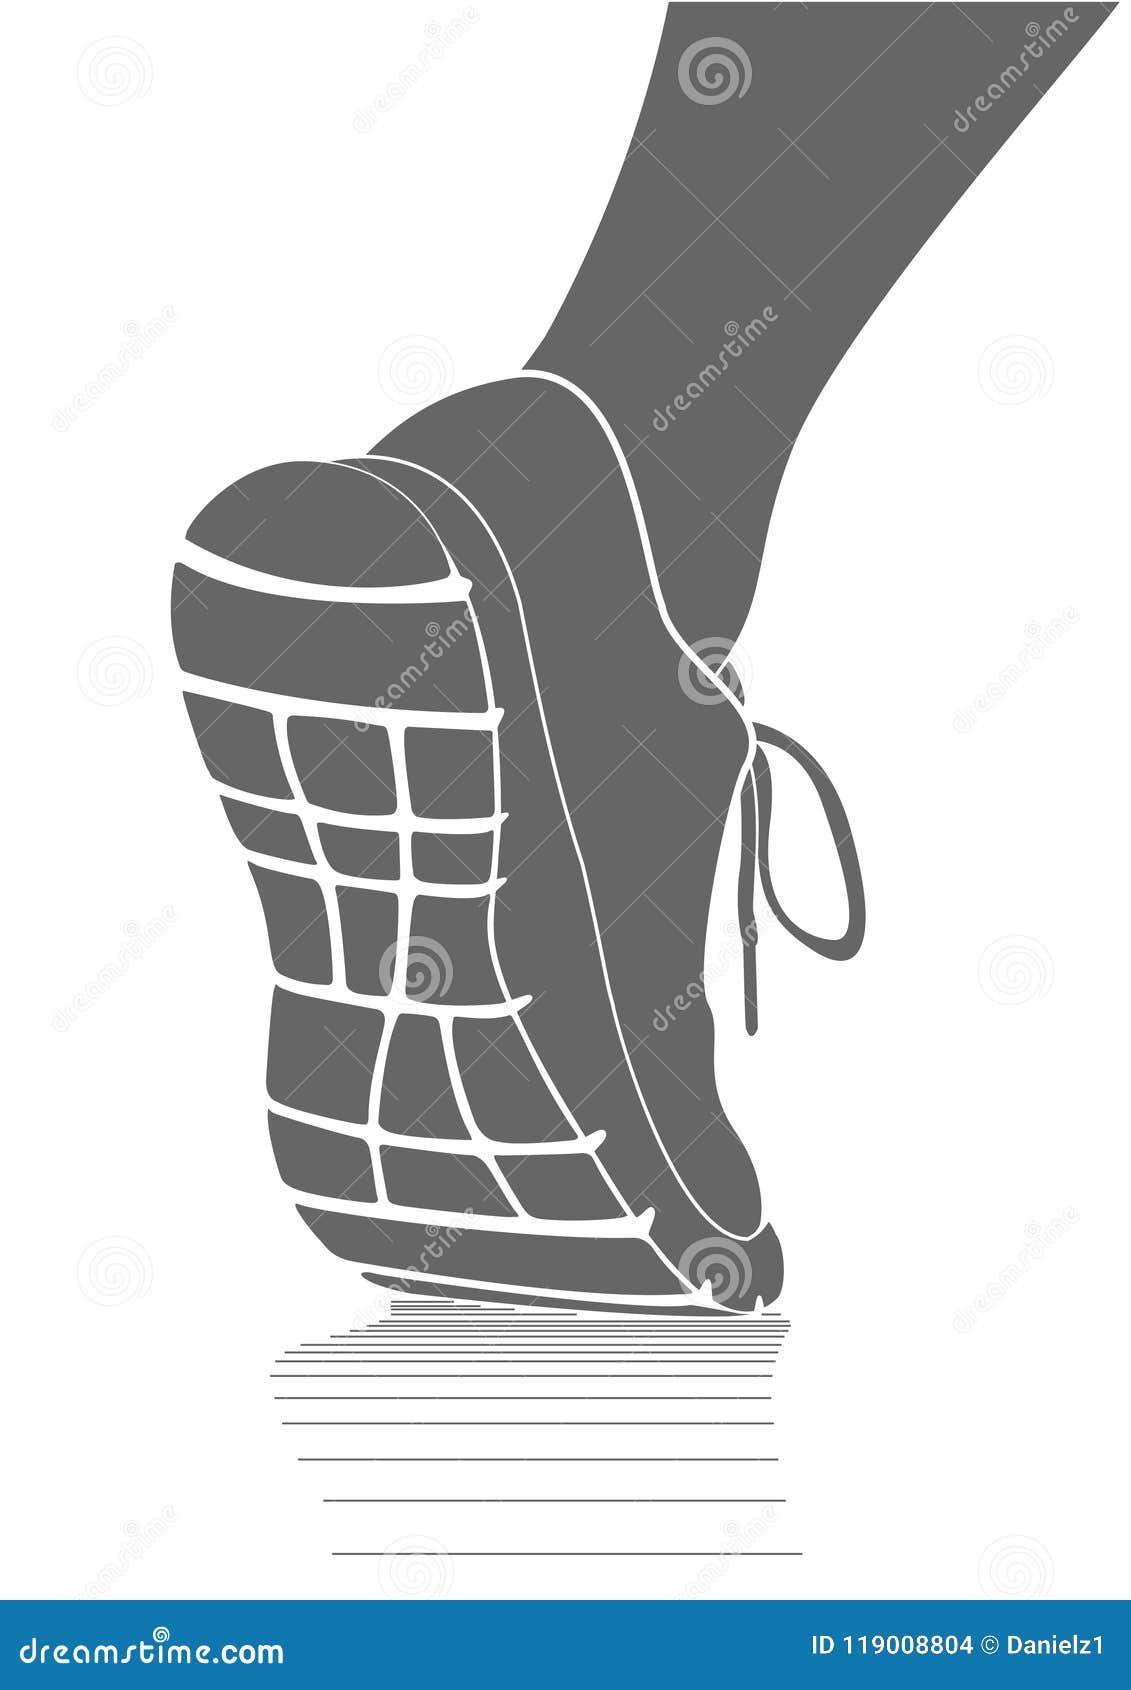 Running Sports Shoes Icon, Simple Stock Vector - Illustration of outline, 119008804